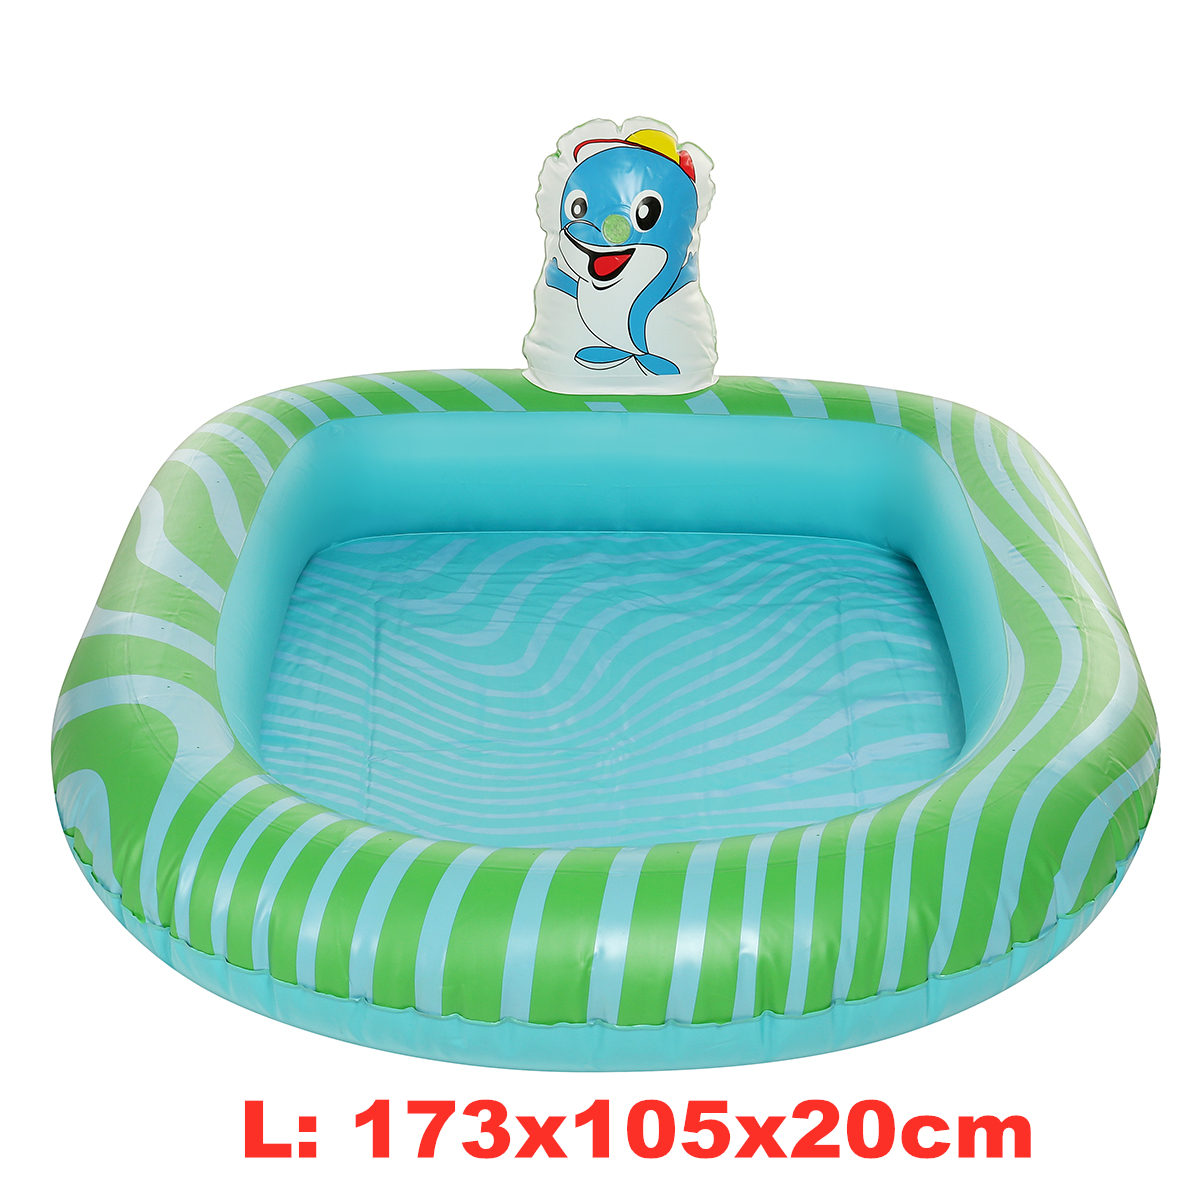 PVC-Children-Inflatable-Swimming-Pool-Sprinkler-Pool-Thickened-Cartoon-Pattern-Outdoor-Swimming-Wate-1851764-11